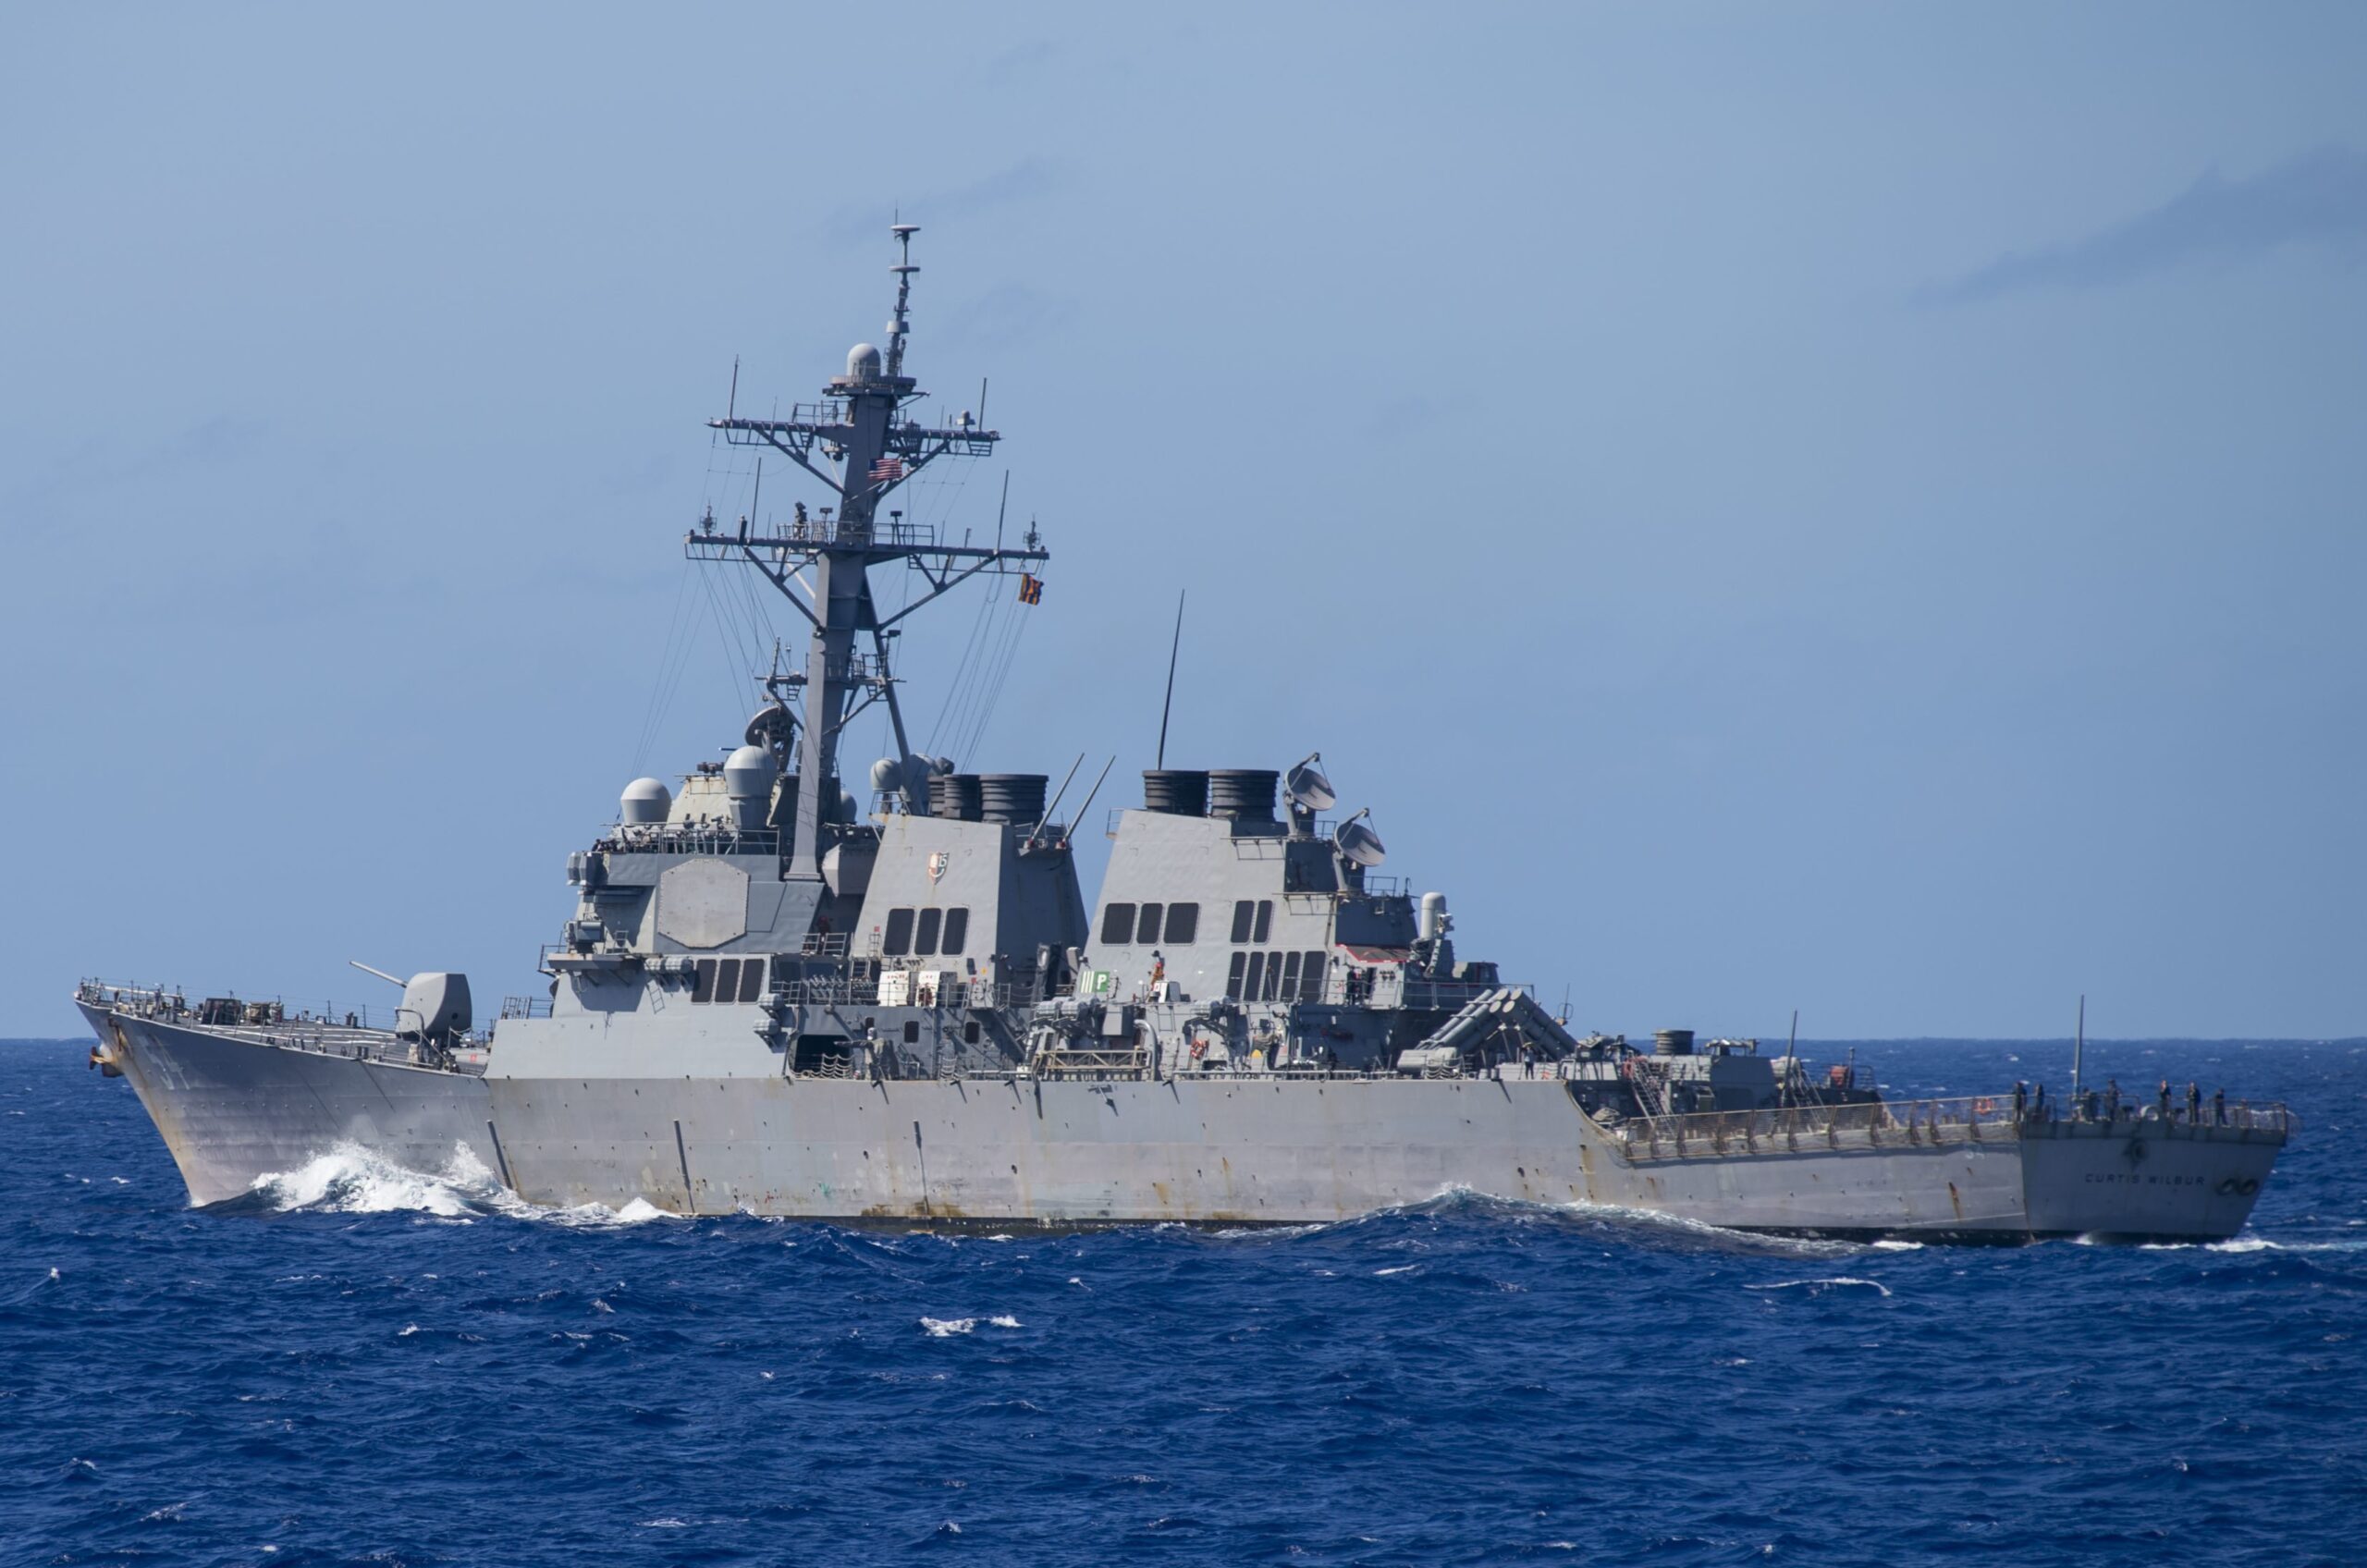 US warship deterred by Chinese warning